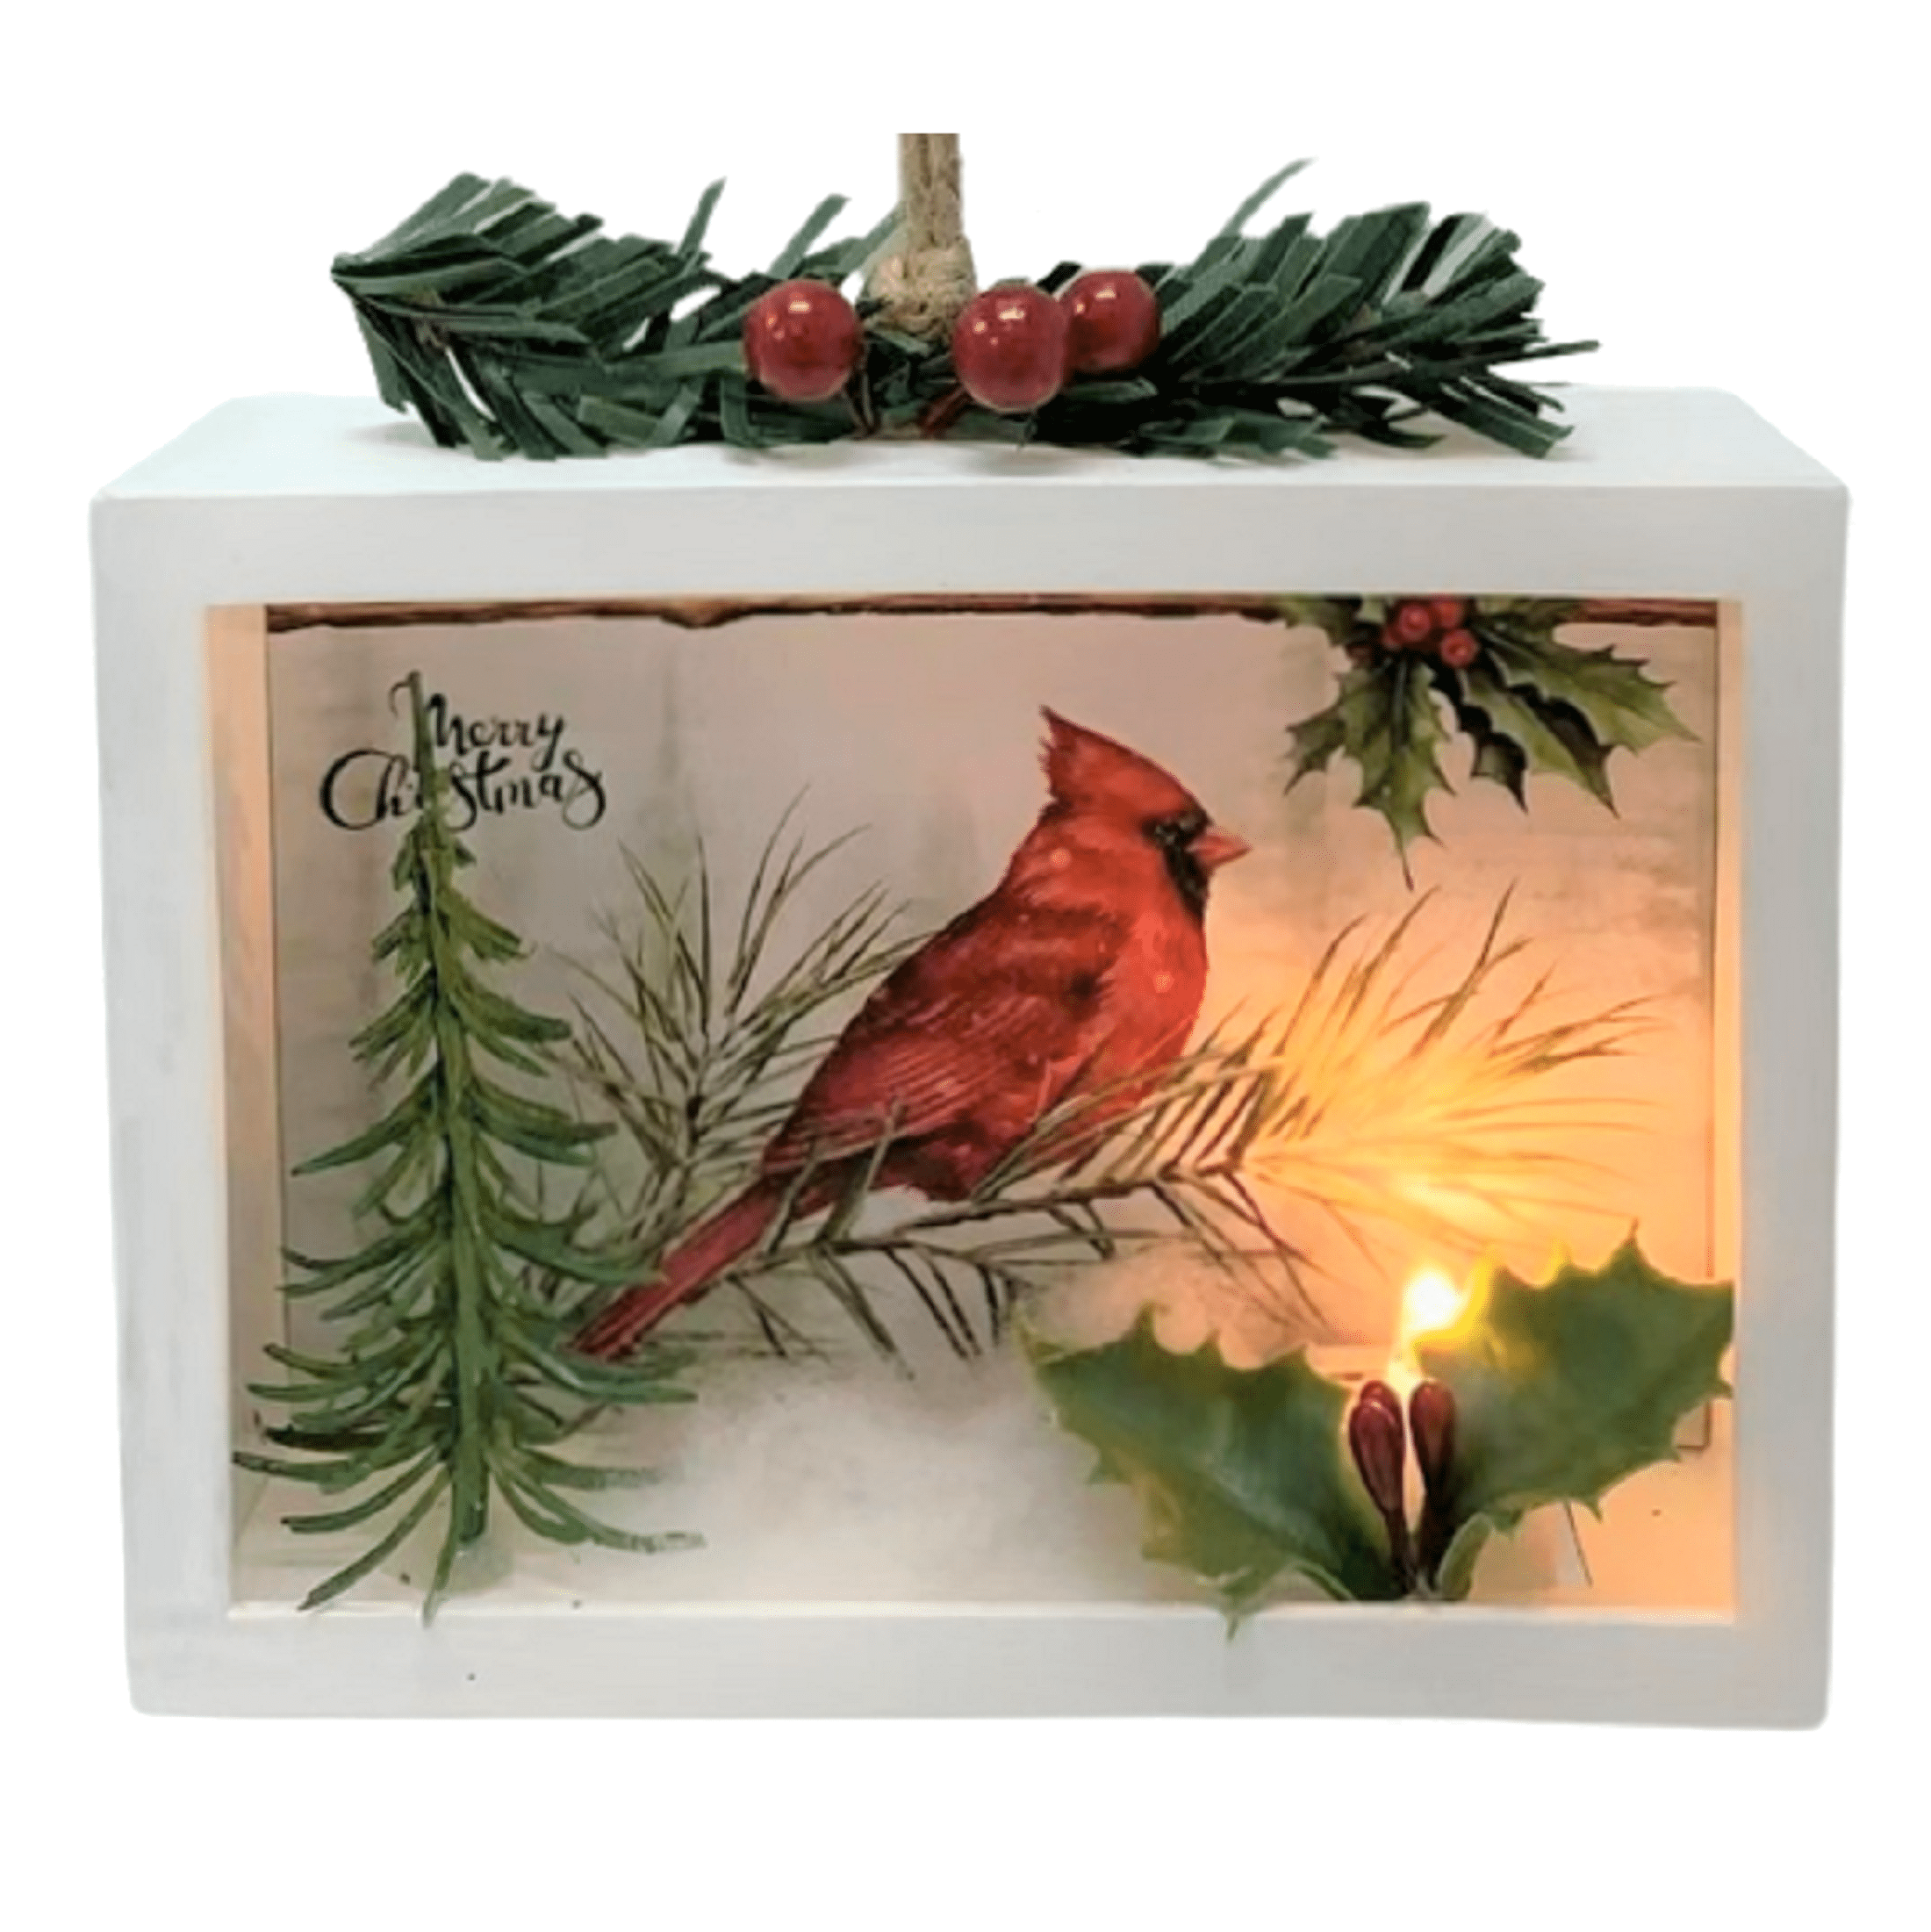 Holiday Time Light LED Shadow Box Ornament. Casual Traditional Theme. White & Red Color.